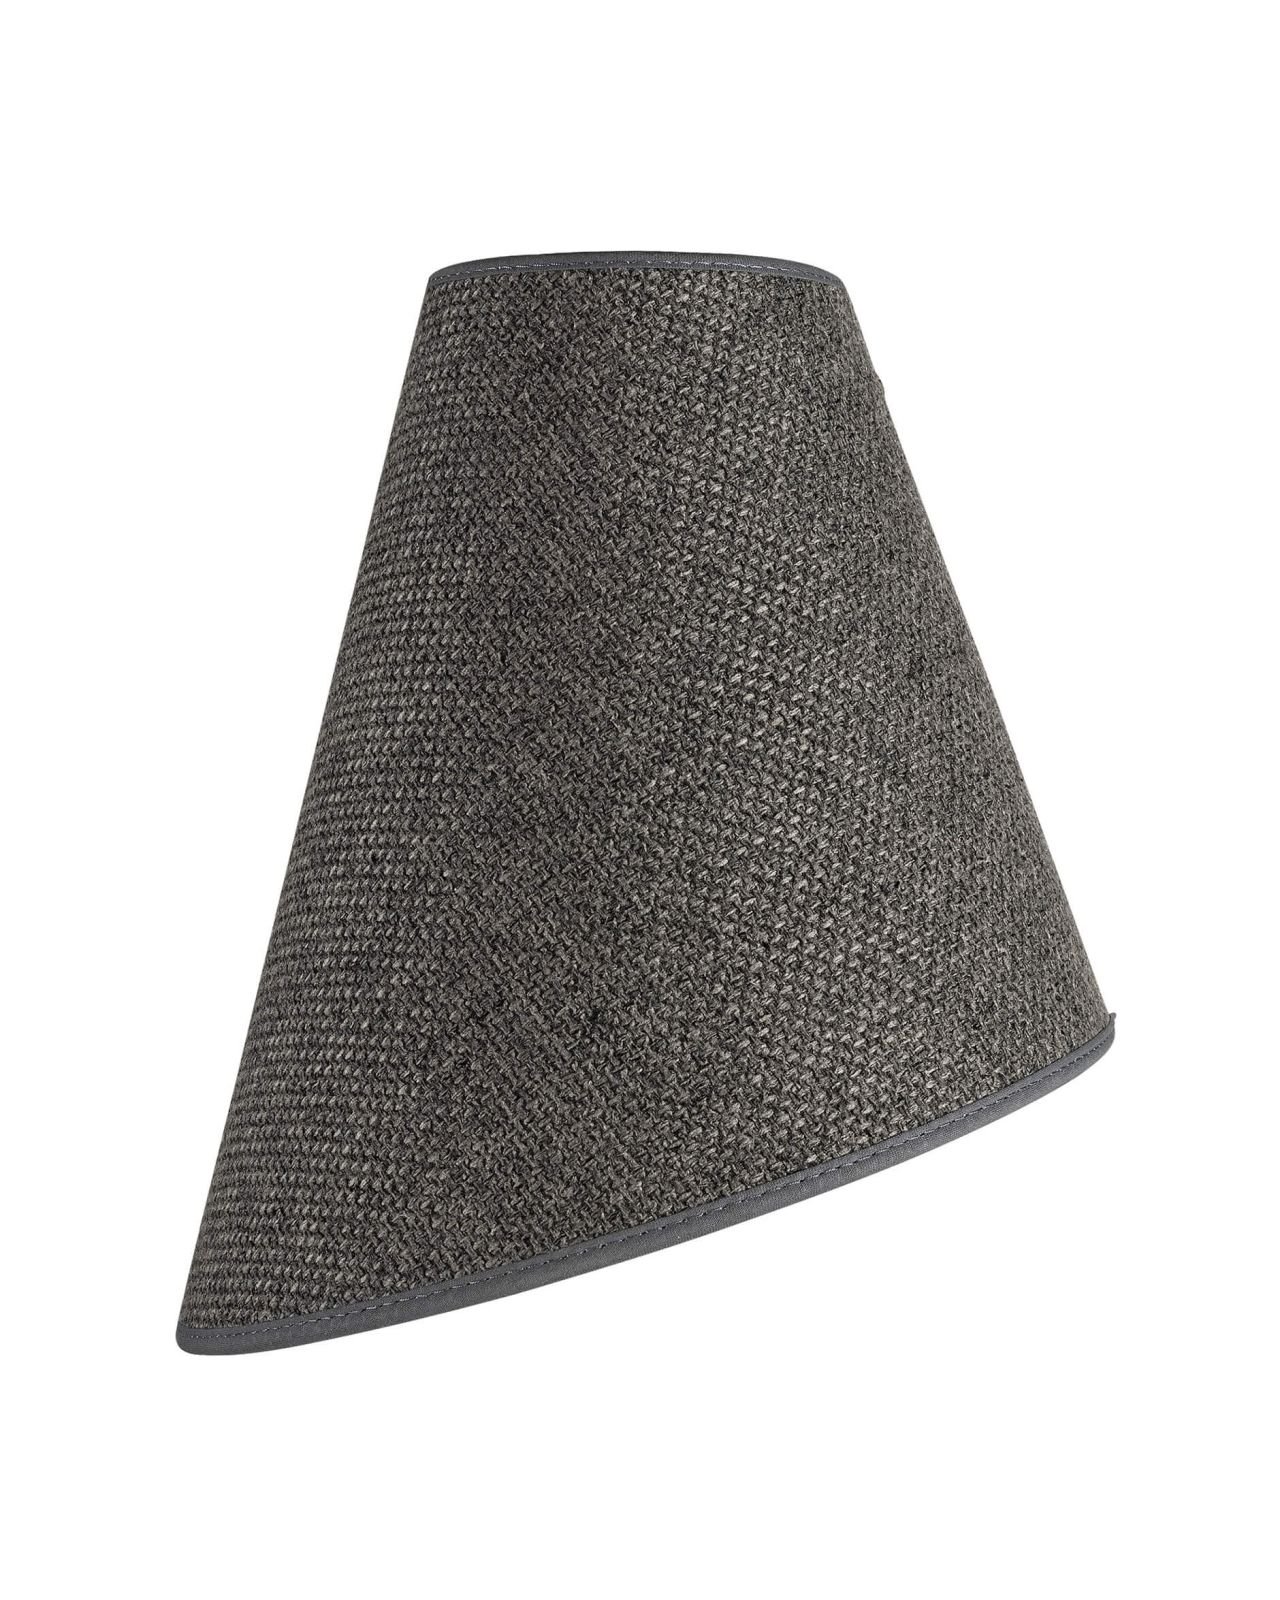 Cone lampshade rave wood